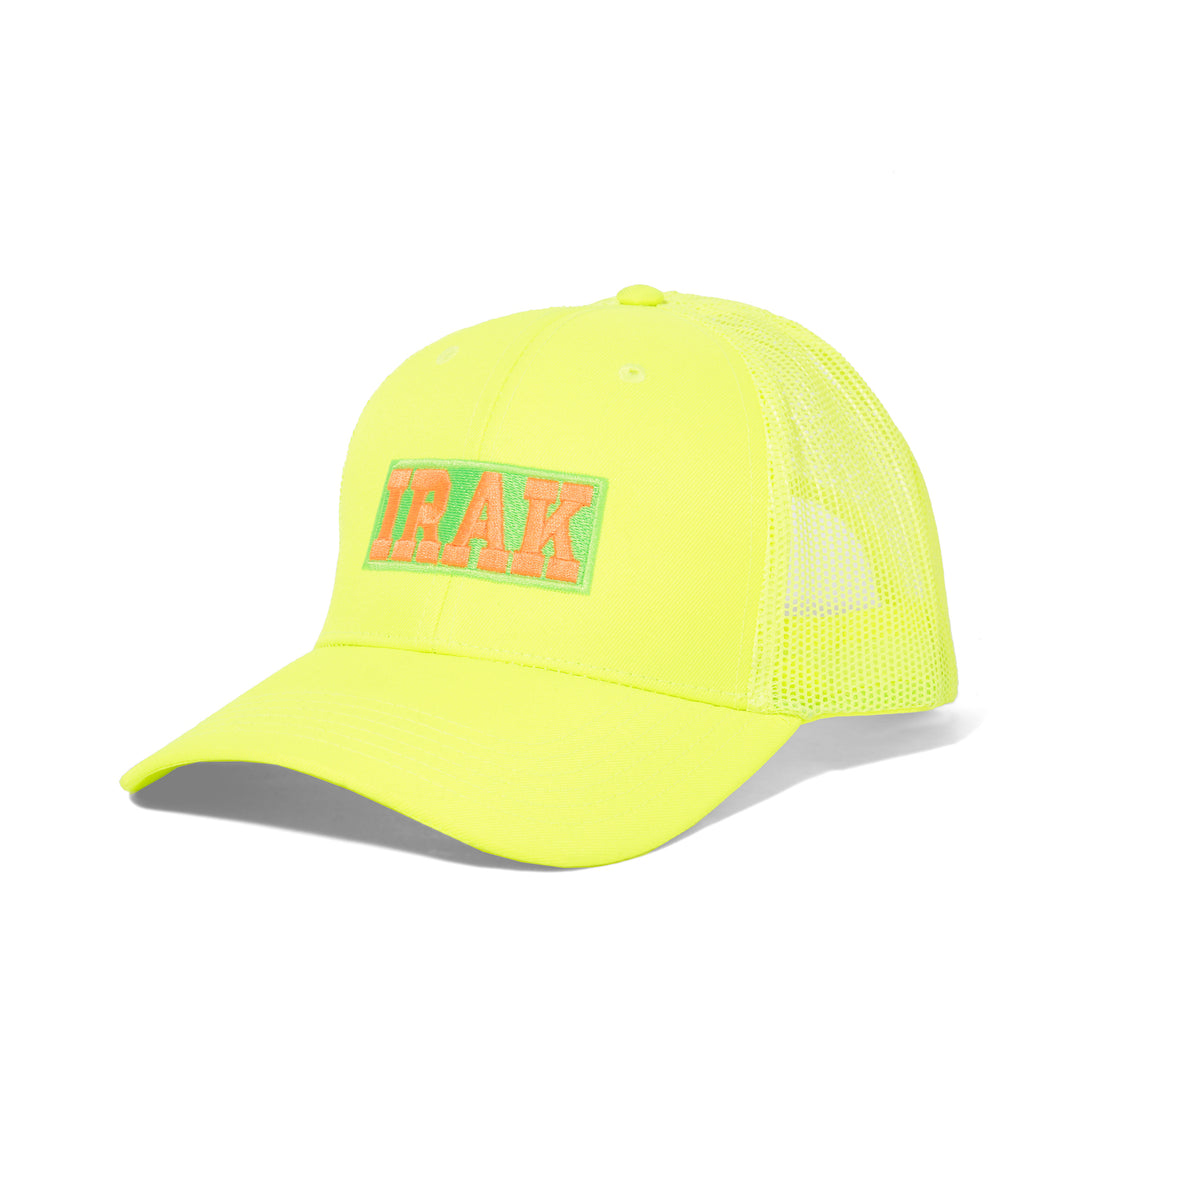 Buy our Neon Trucker Hat, Neon Yellow IRAK now to find your best match